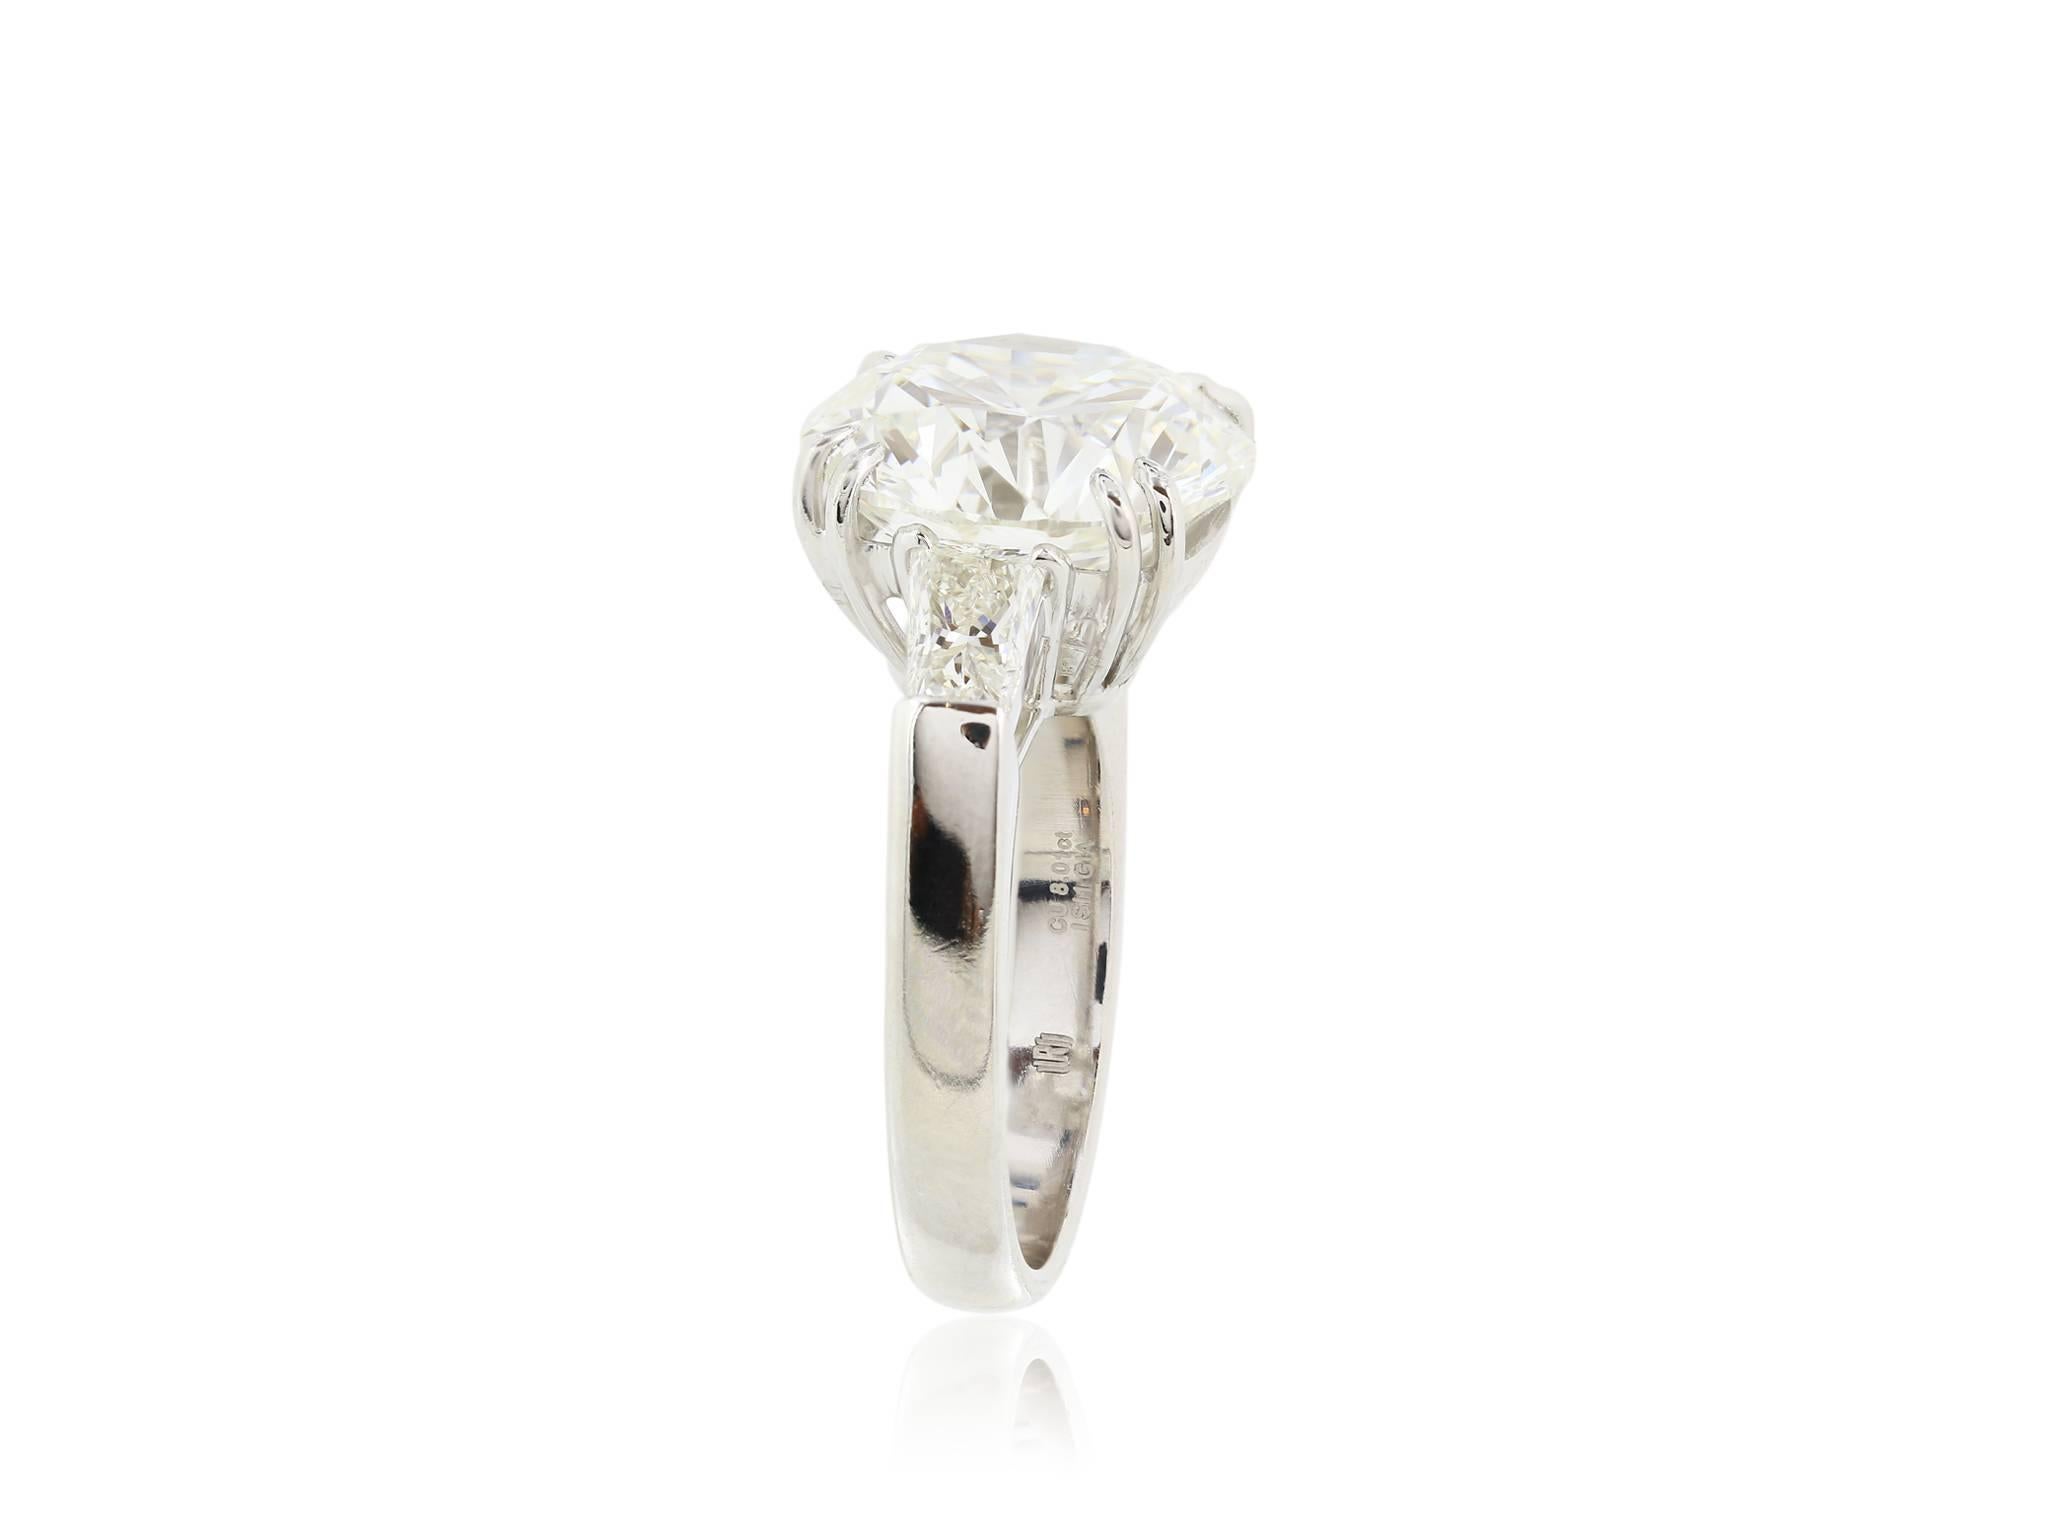 Platinum Diamond ring, featuring one round brilliant cut diamond, weighing 7.54 carats  having a color and clarity of G SI1 the diamond is flanked by two trapizoids.